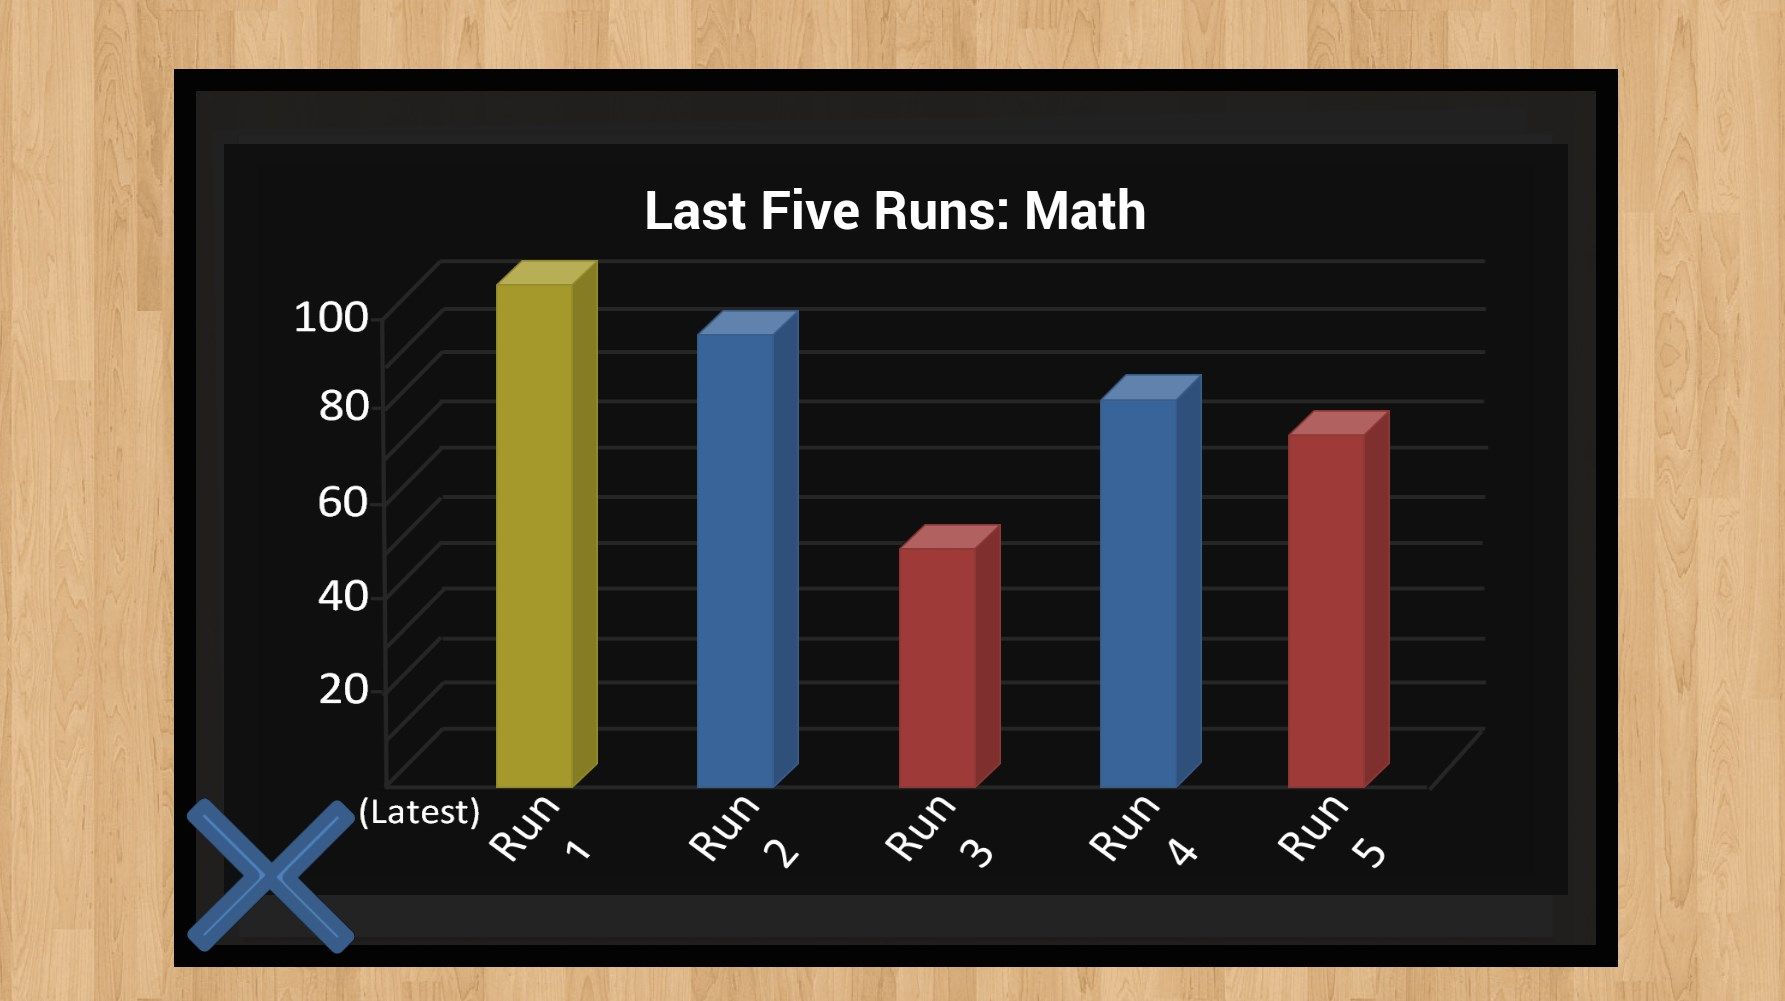 Statistics for every card and set allows you to keep track of your progress and areas of focus.